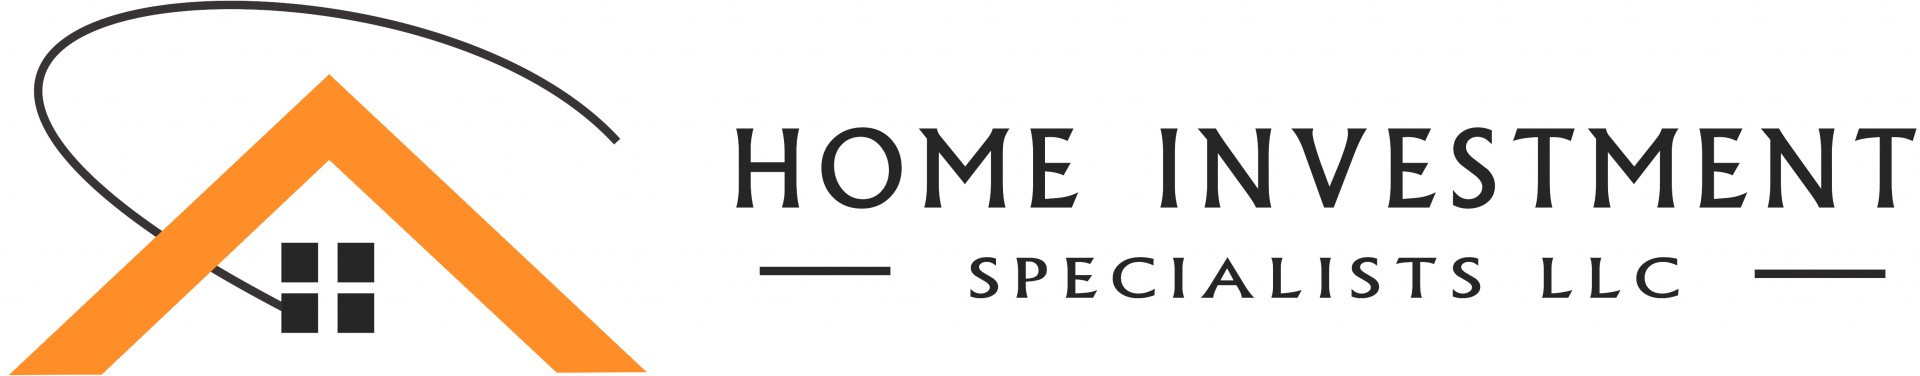 Home Investment Specialists